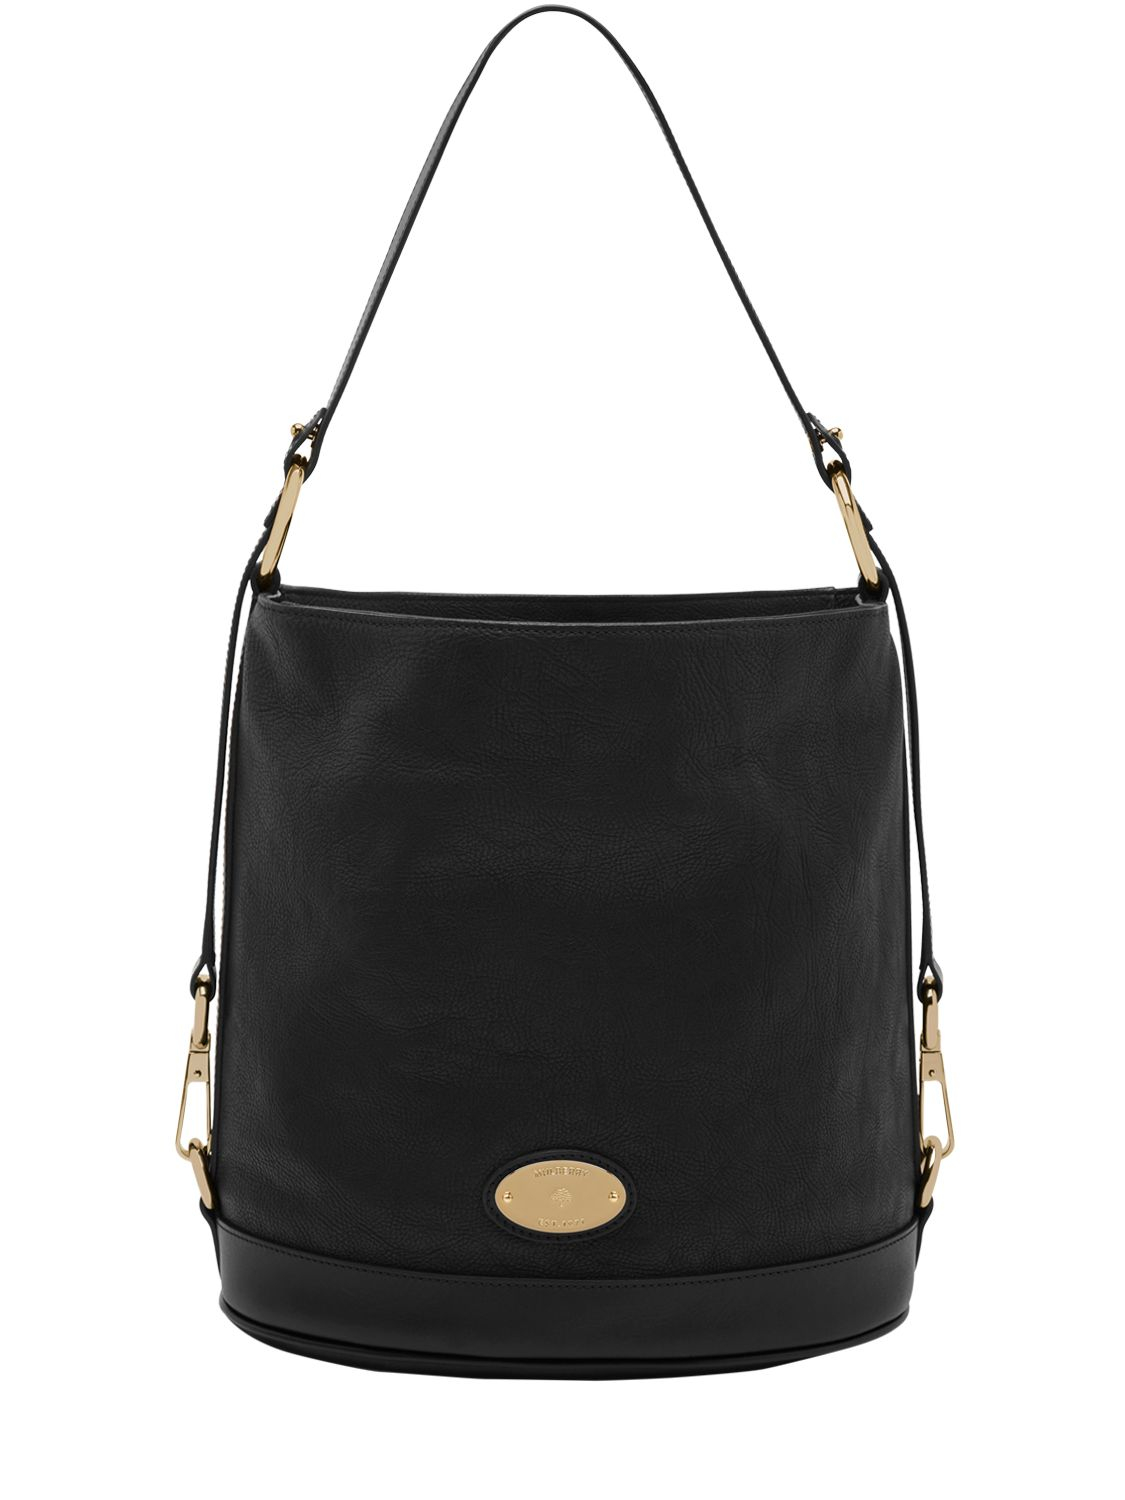 Mulberry Jamie Washed Leather Bucket Bag in Black - Lyst